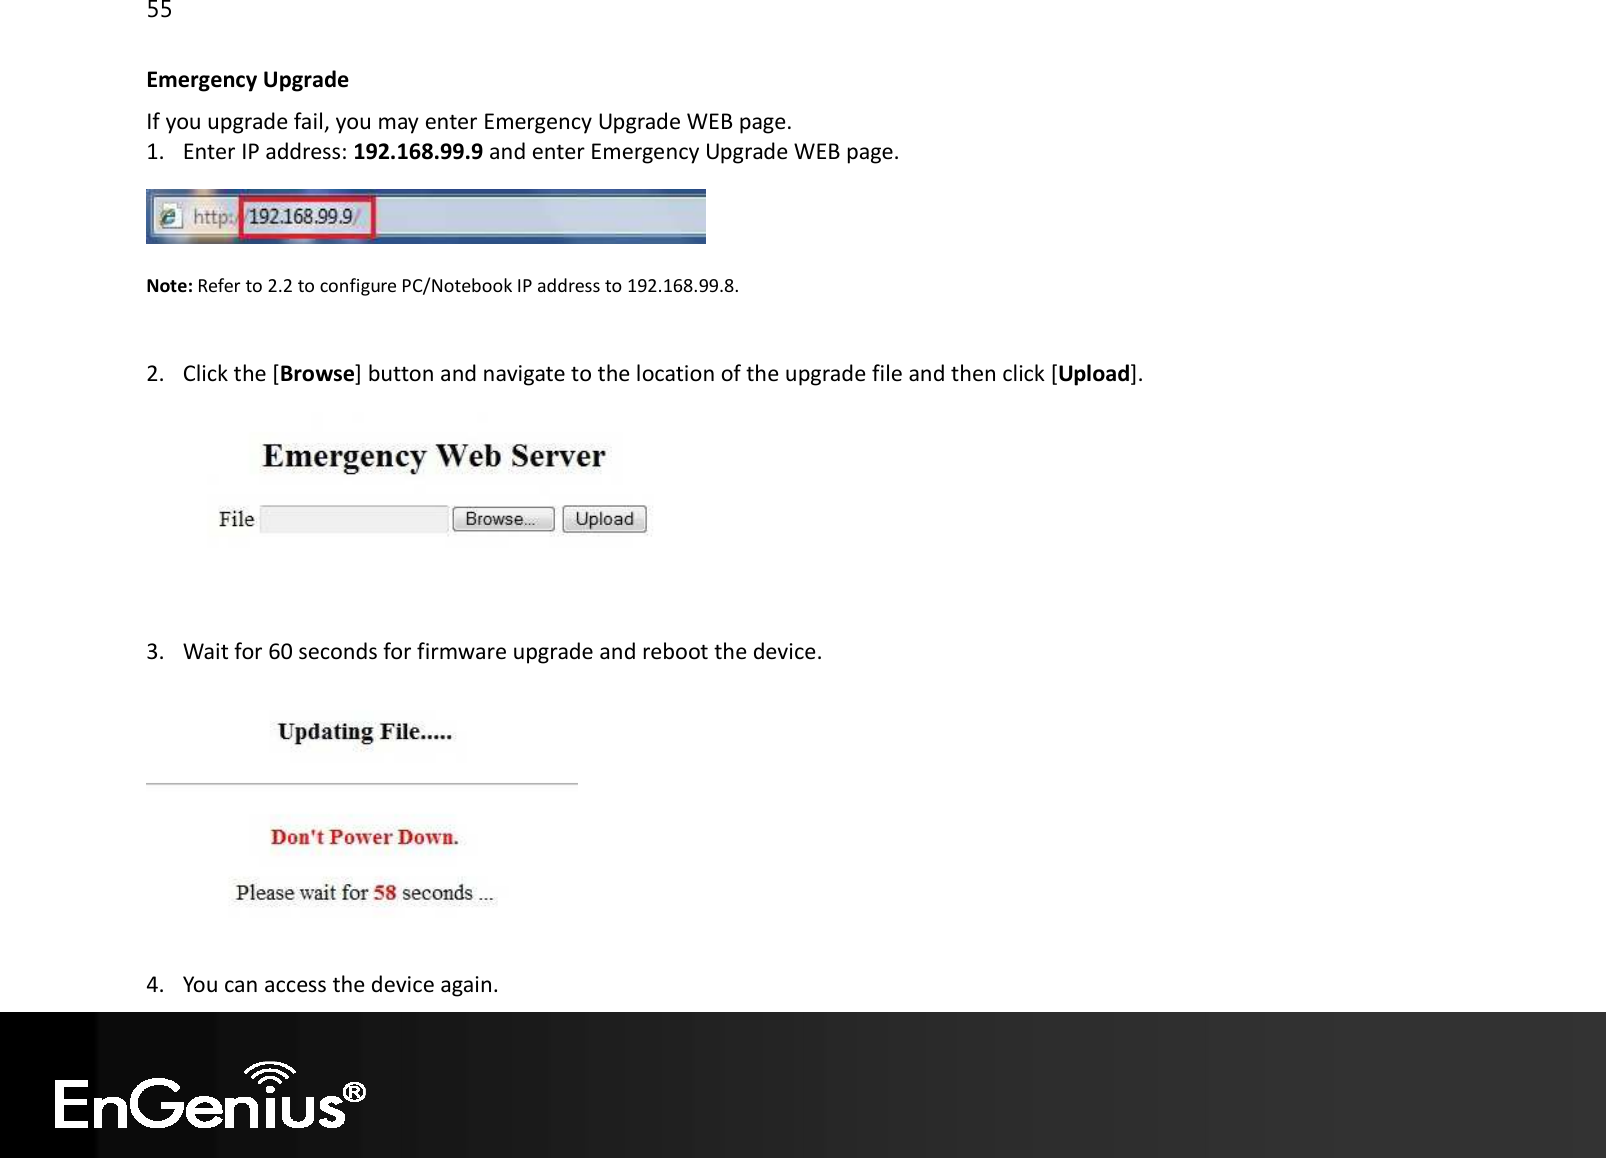 55  Emergency Upgrade If you upgrade fail, you may enter Emergency Upgrade WEB page. 1. Enter IP address: 192.168.99.9 and enter Emergency Upgrade WEB page.   Note: Refer to 2.2 to configure PC/Notebook IP address to 192.168.99.8.   2. Click the [Browse] button and navigate to the location of the upgrade file and then click [Upload].    3. Wait for 60 seconds for firmware upgrade and reboot the device.   4. You can access the device again. 